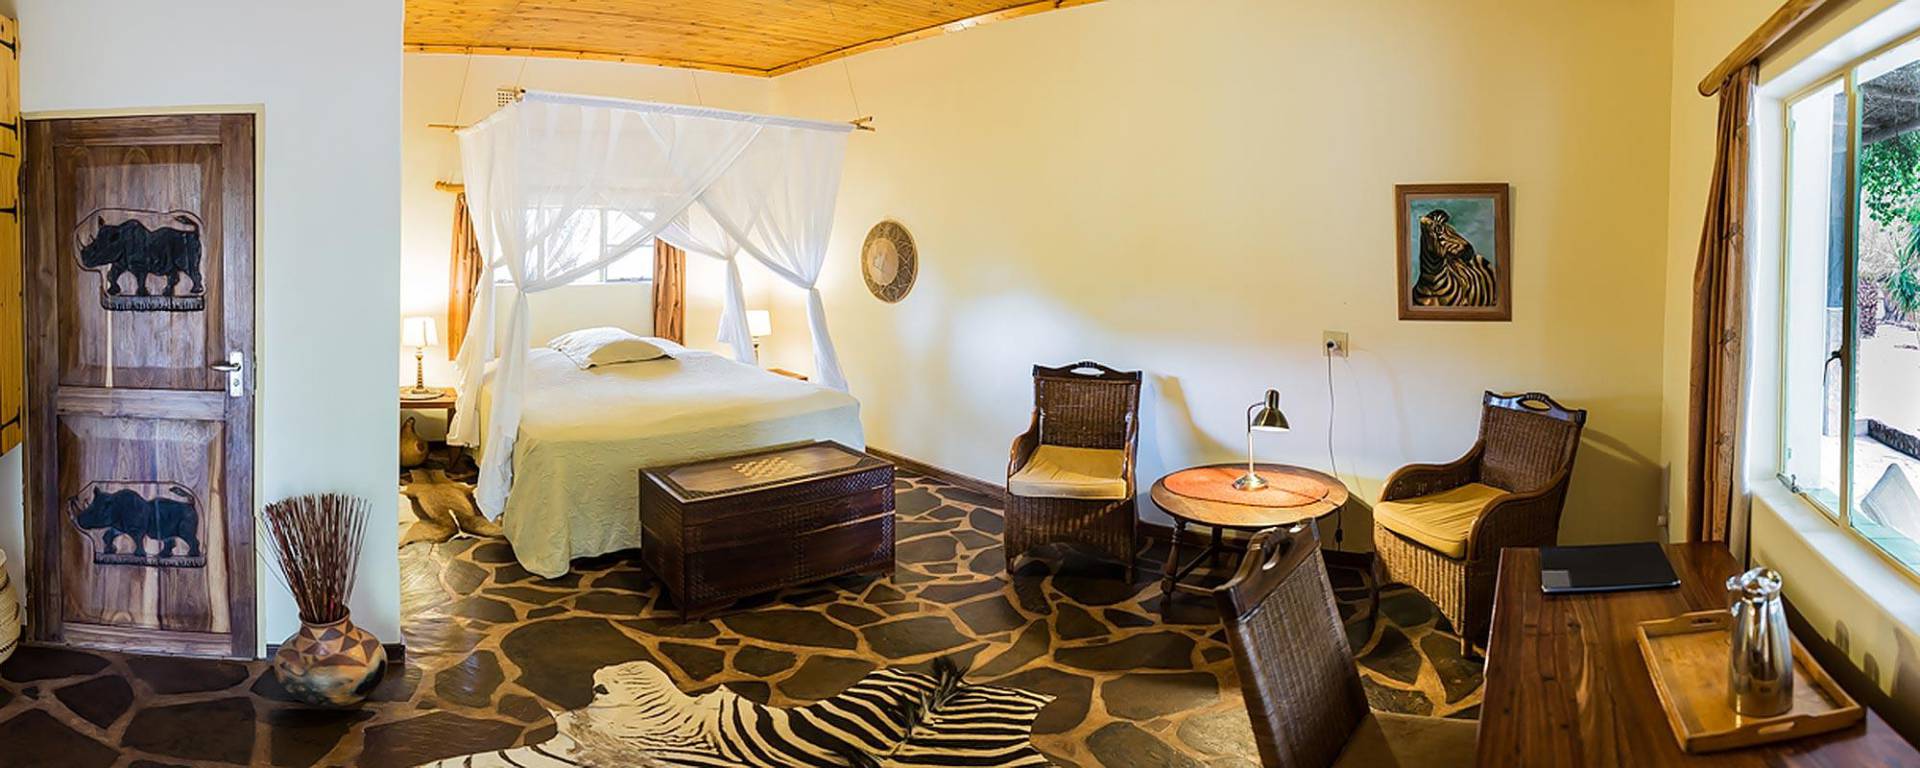 Gust room at a lodge in Namibia